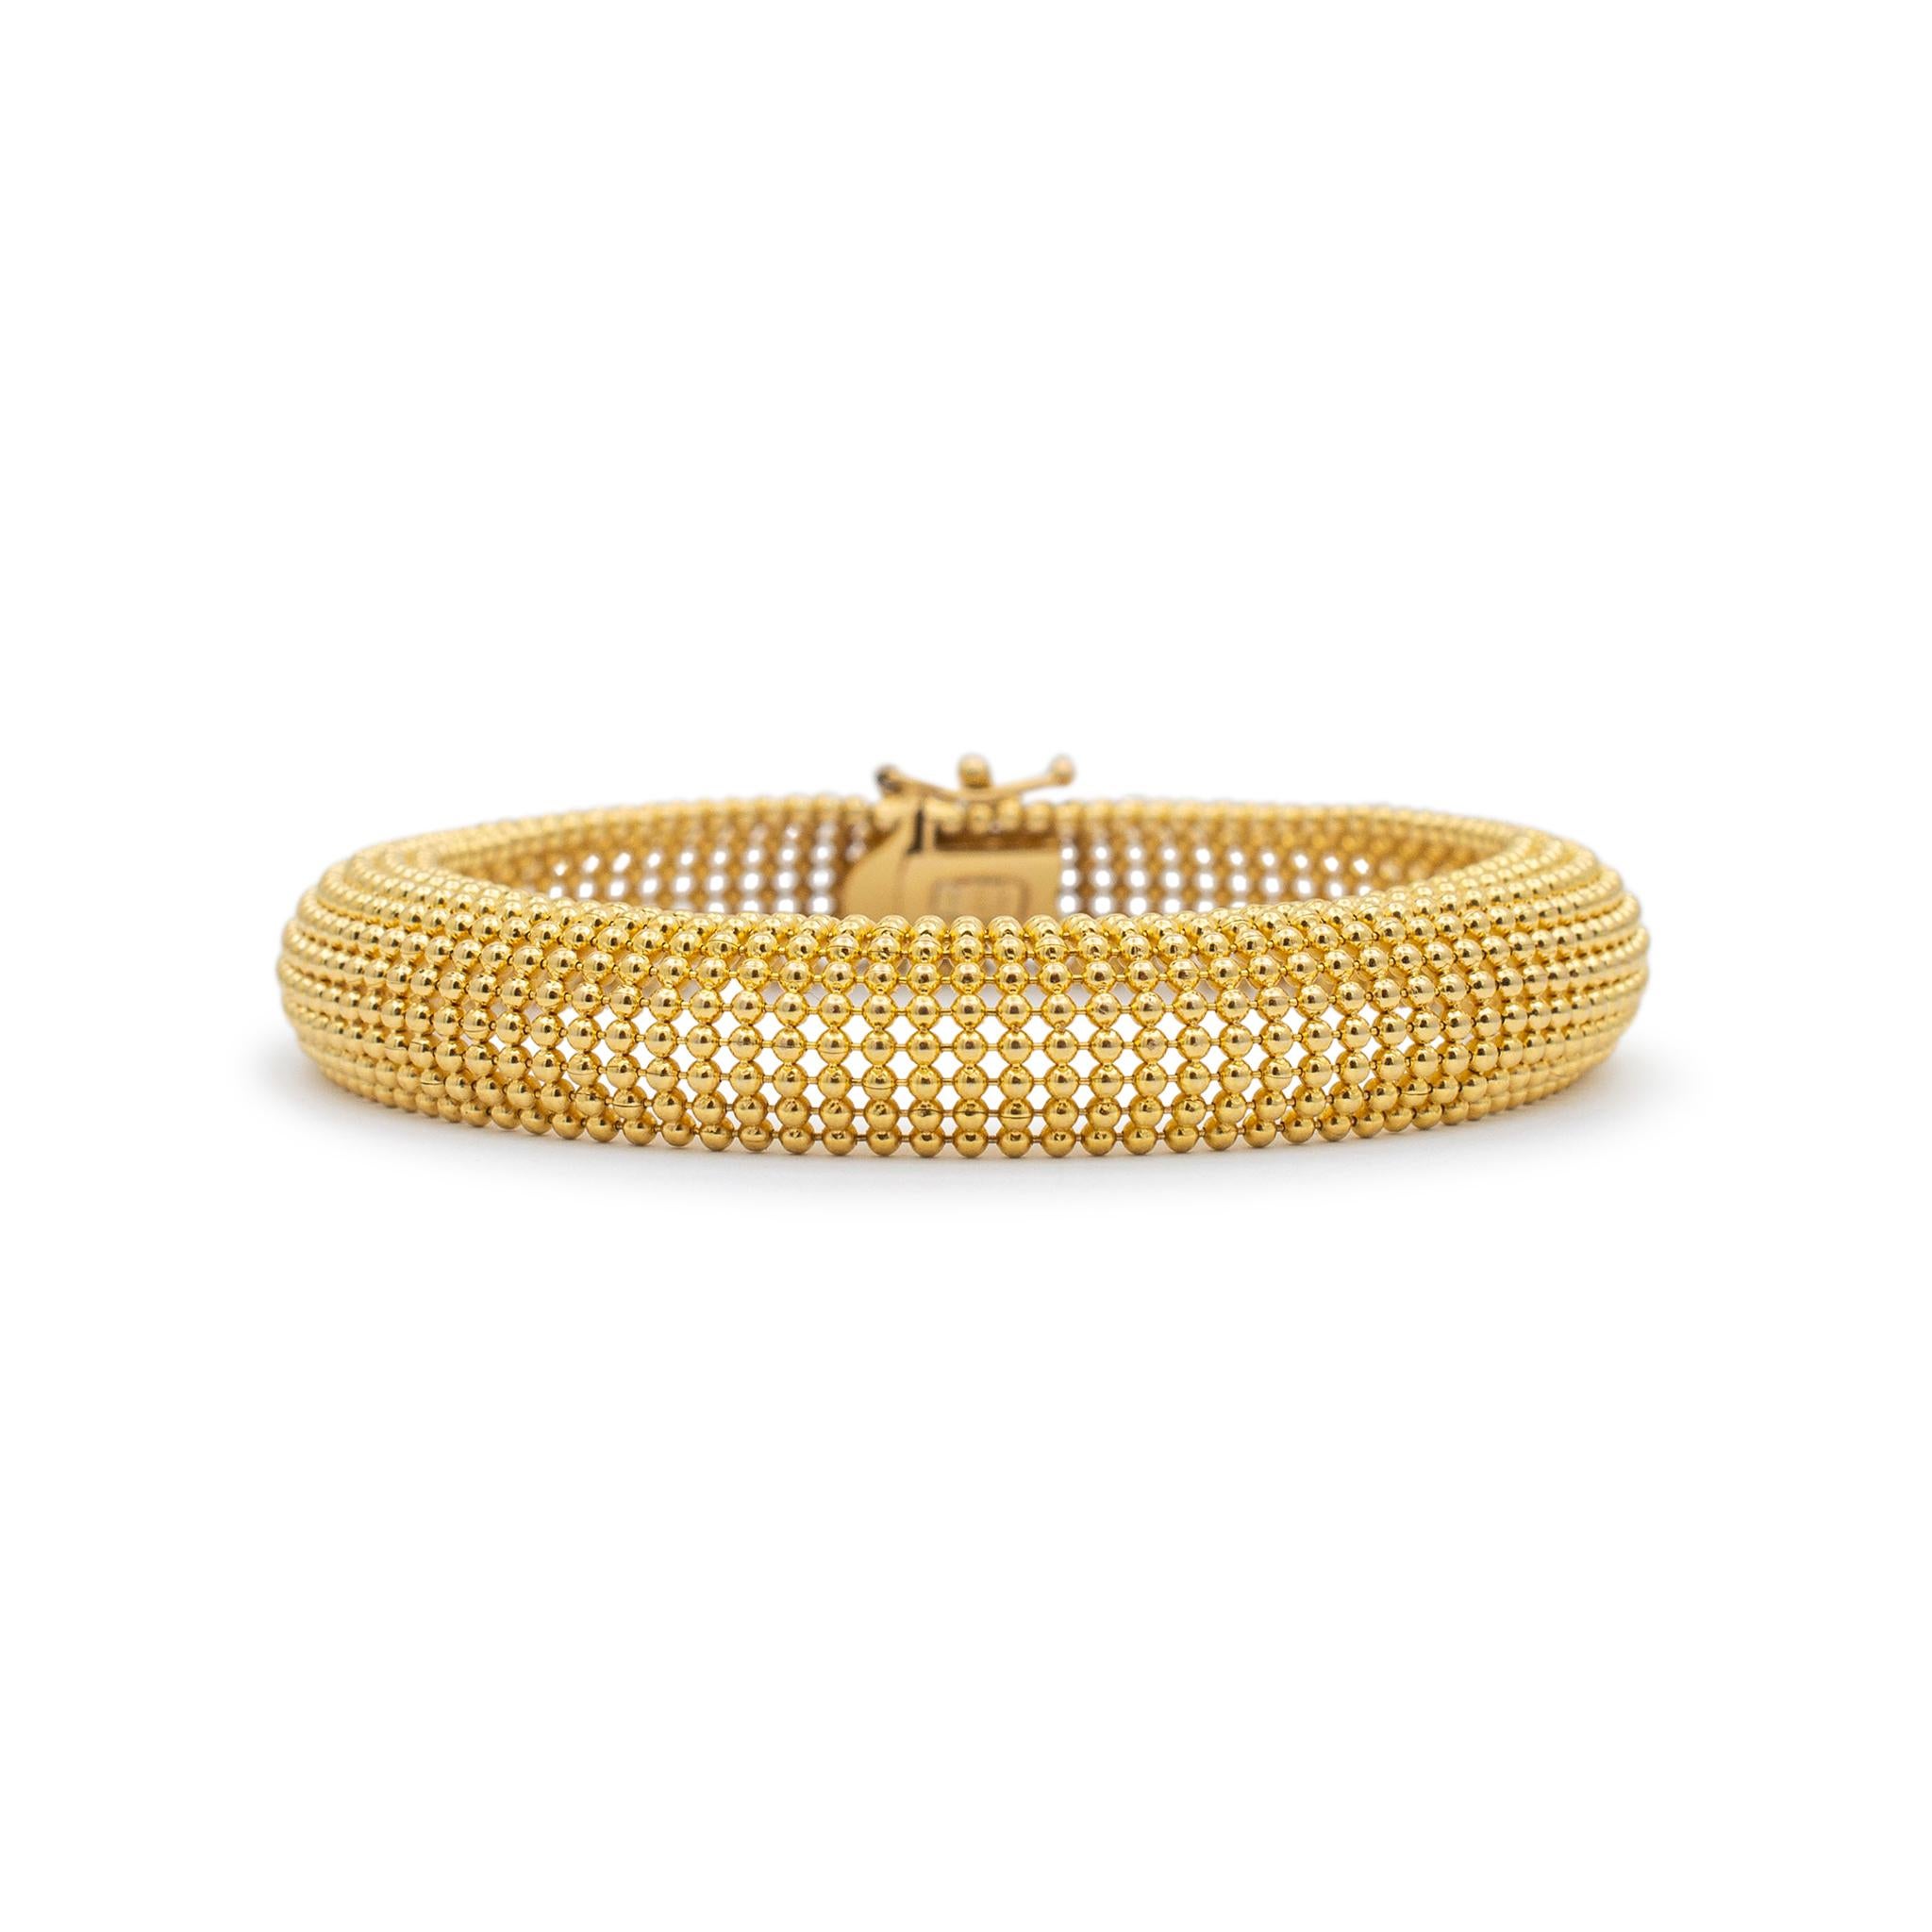 Gender: Ladies

Material: 14K Yellow Gold

Length: 7.50 inches

Width: 10.80 mm

Weight: 17.40 grams

Ladies 14K yellow gold mesh link bracelet. Engraved with 